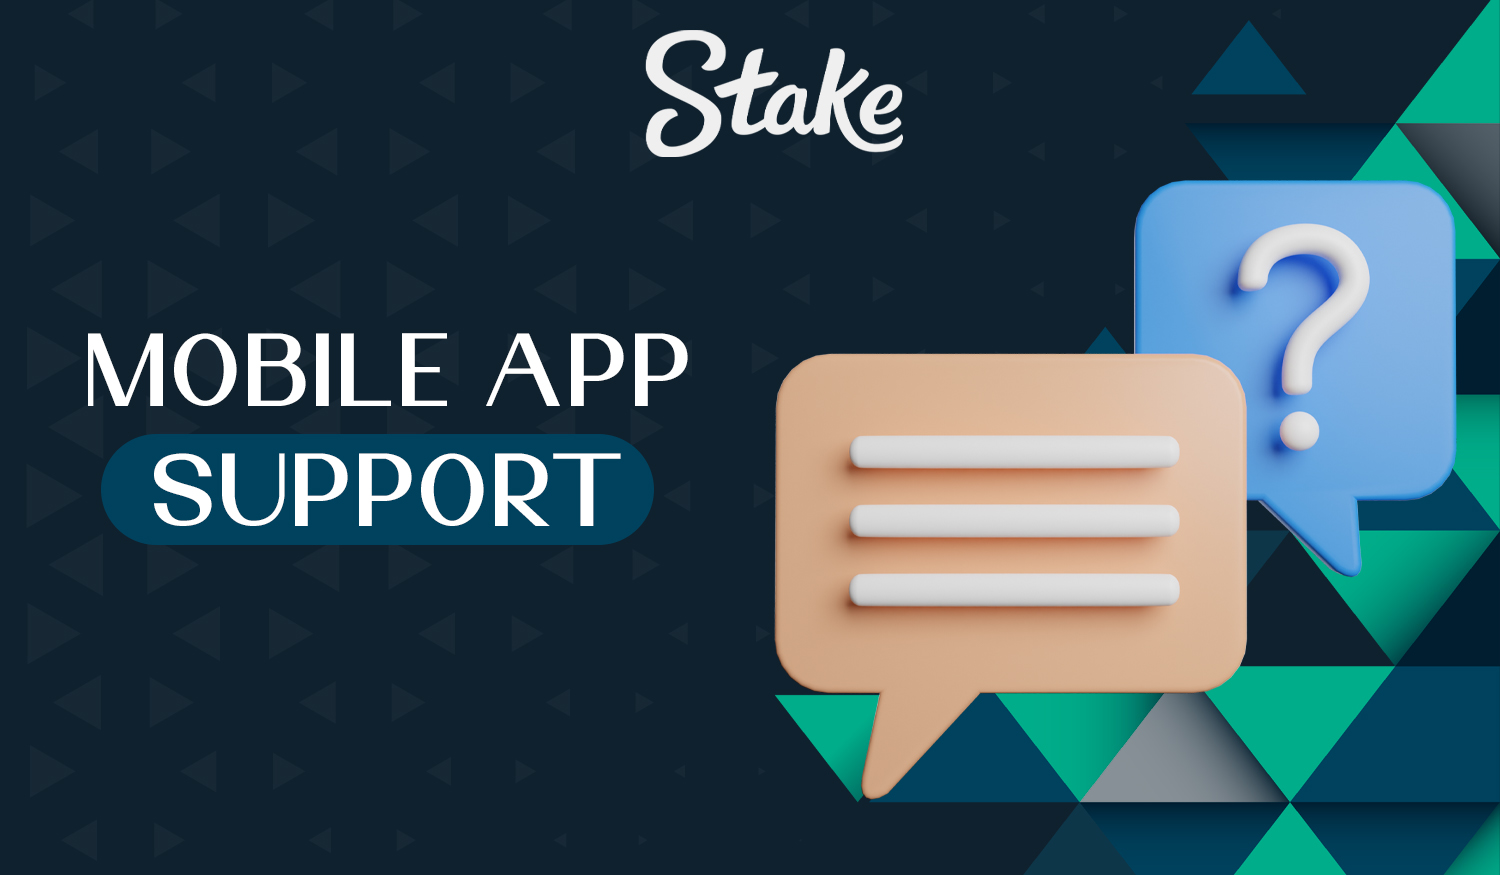 How to contact support via the Stake Mobile App 